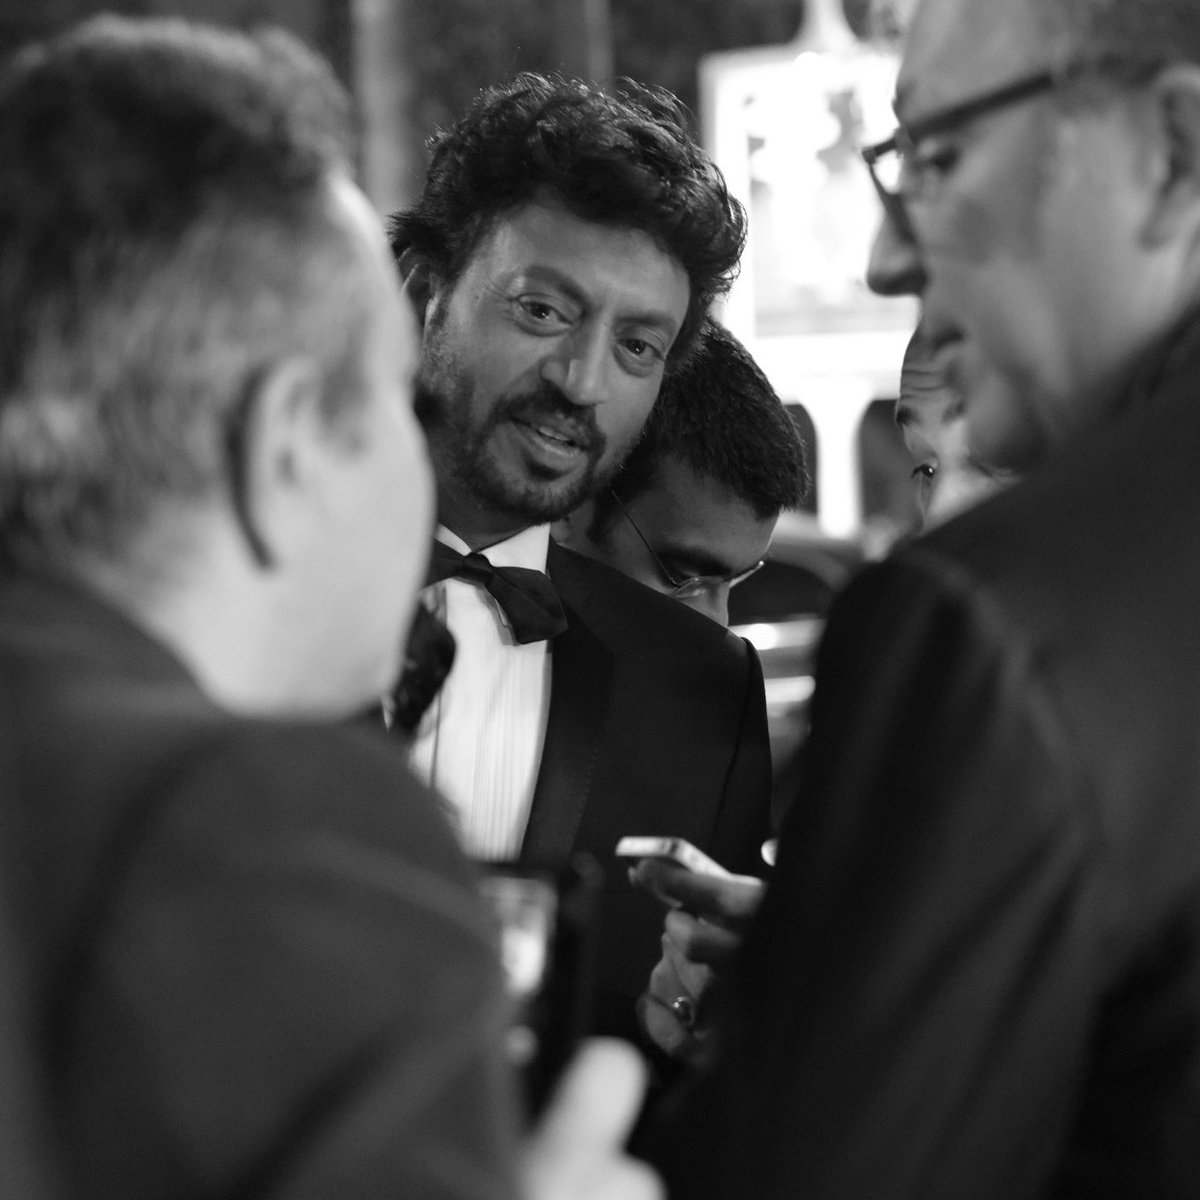 Irrfan Khan at the @Festival_Cannes, 2013. 📸: @QCarb